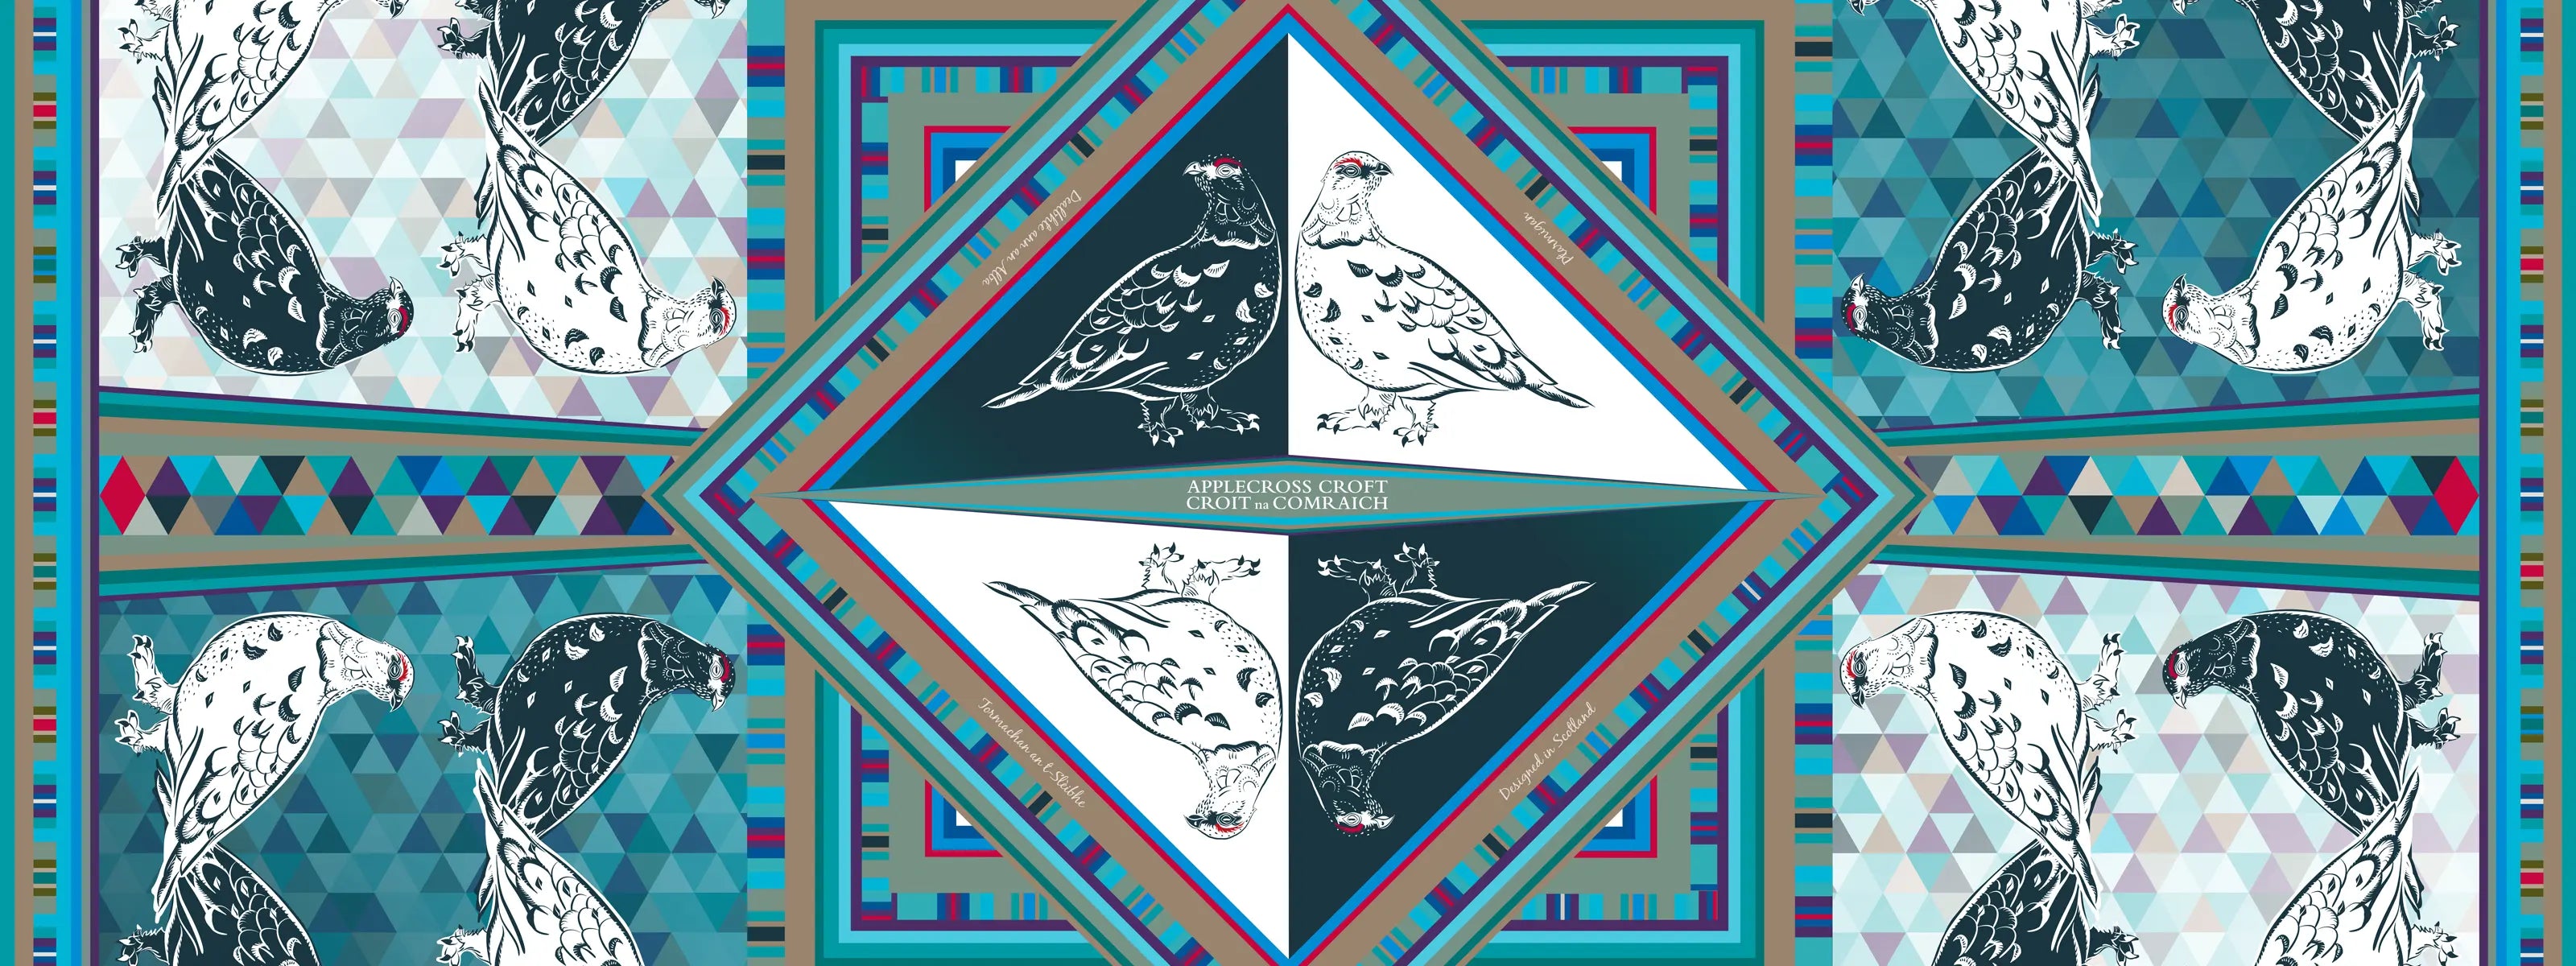 A detail from our Ptarmigan silk scarf design. Inspired by the Scottish Highlands and perfect as a gift for a special occasion.